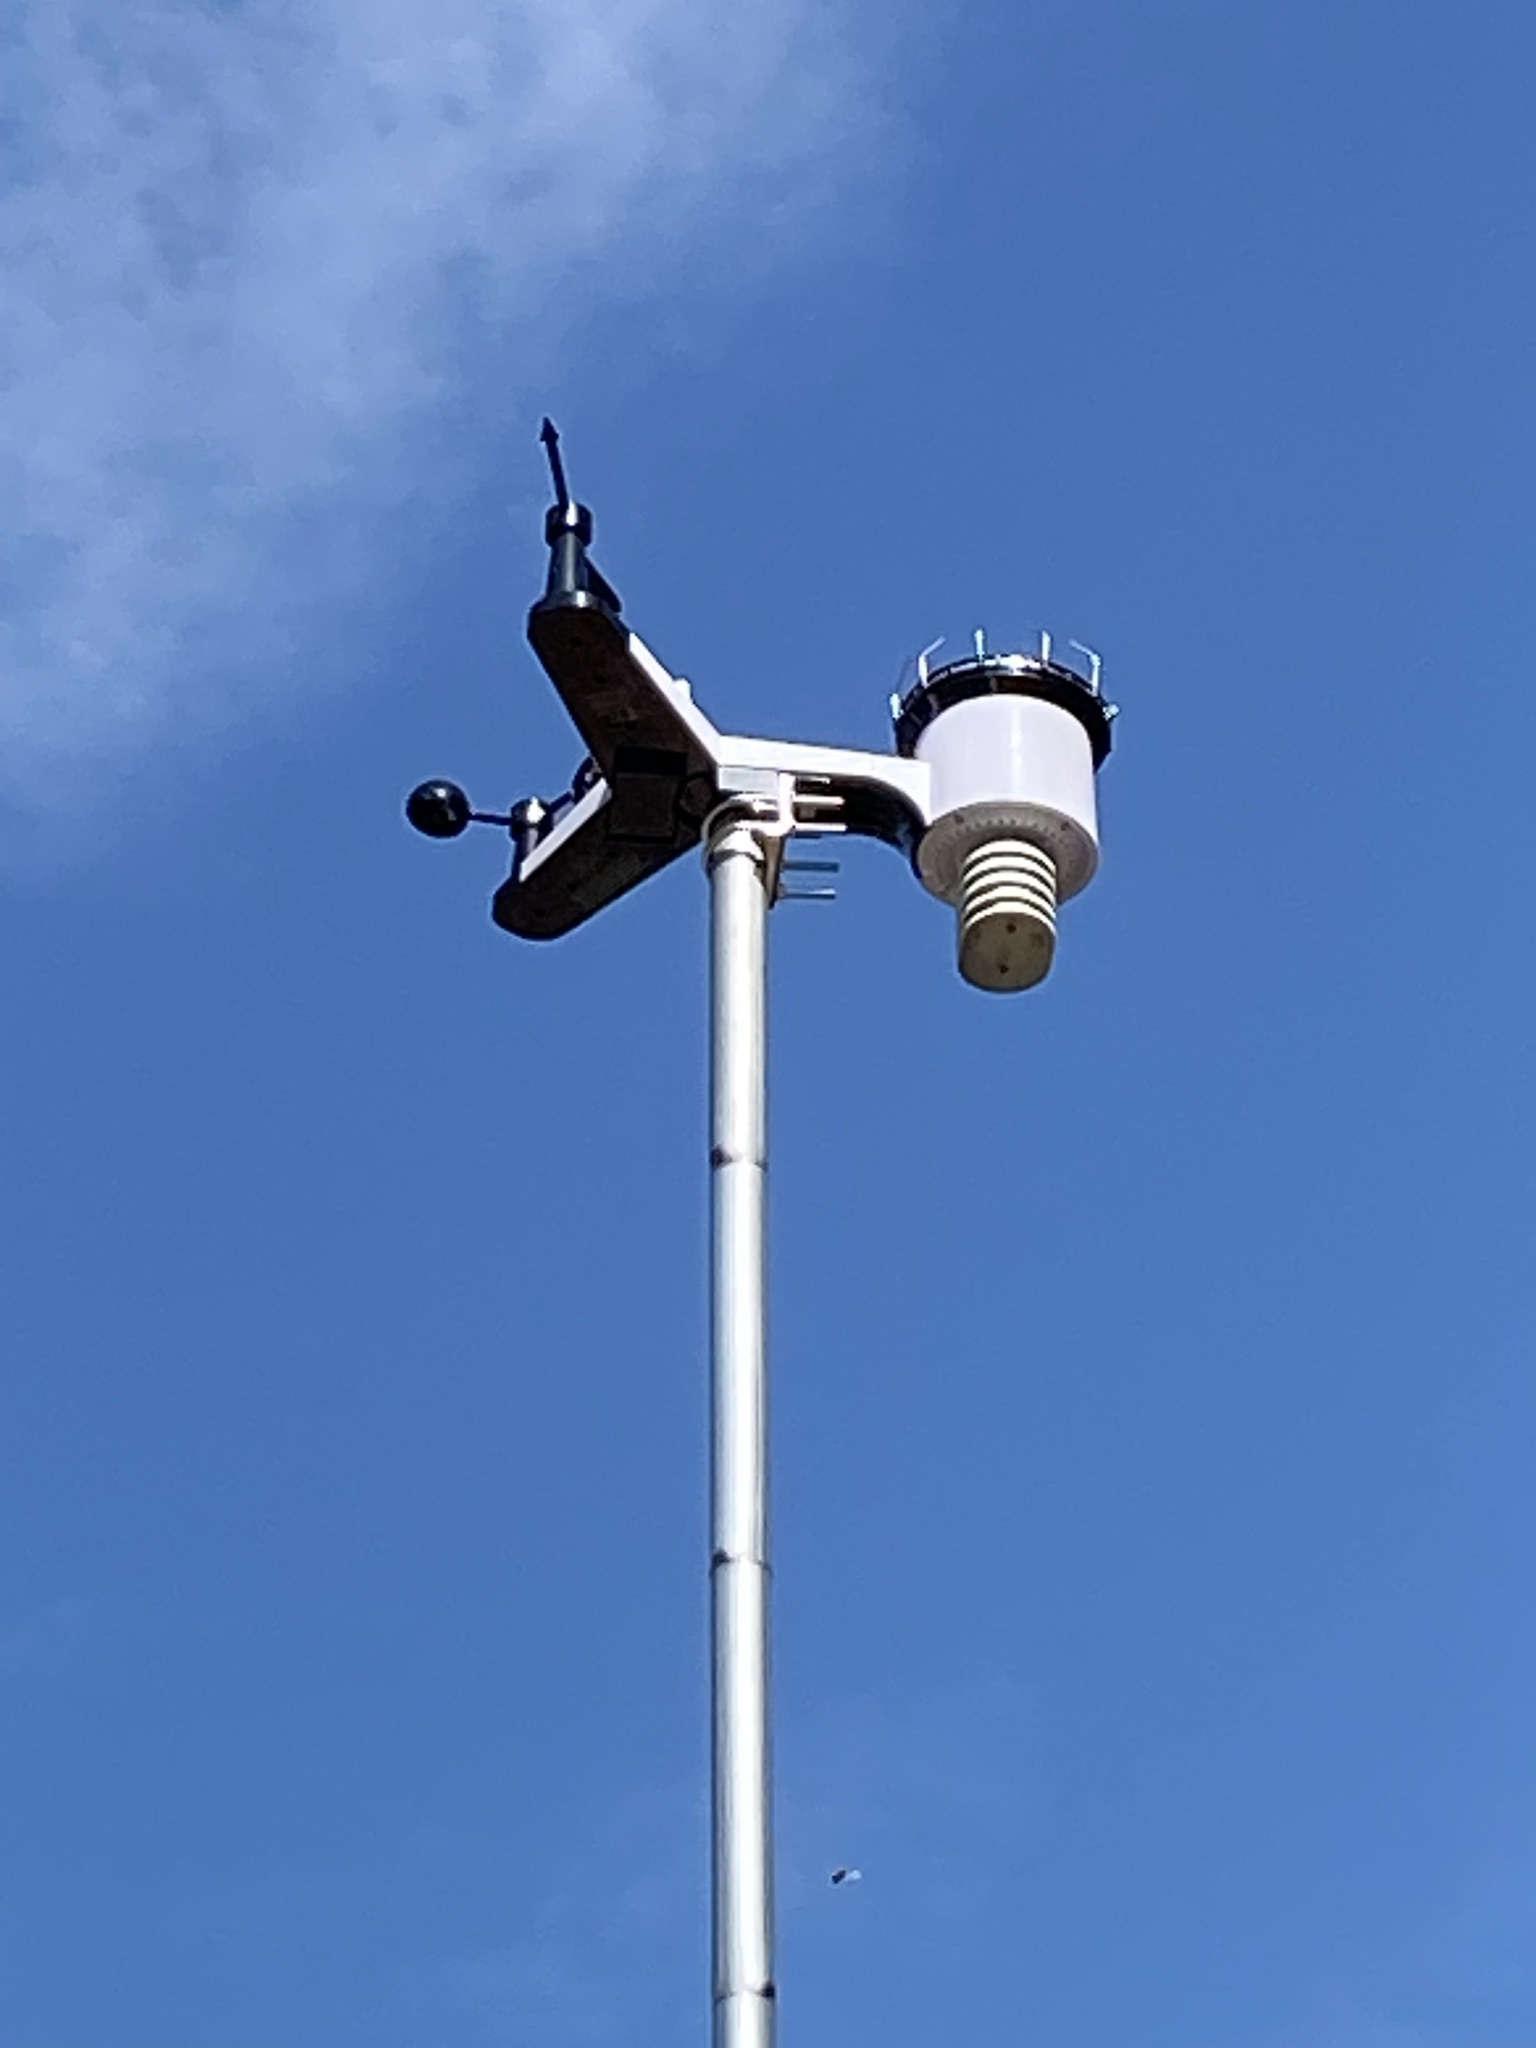 AACG weather station